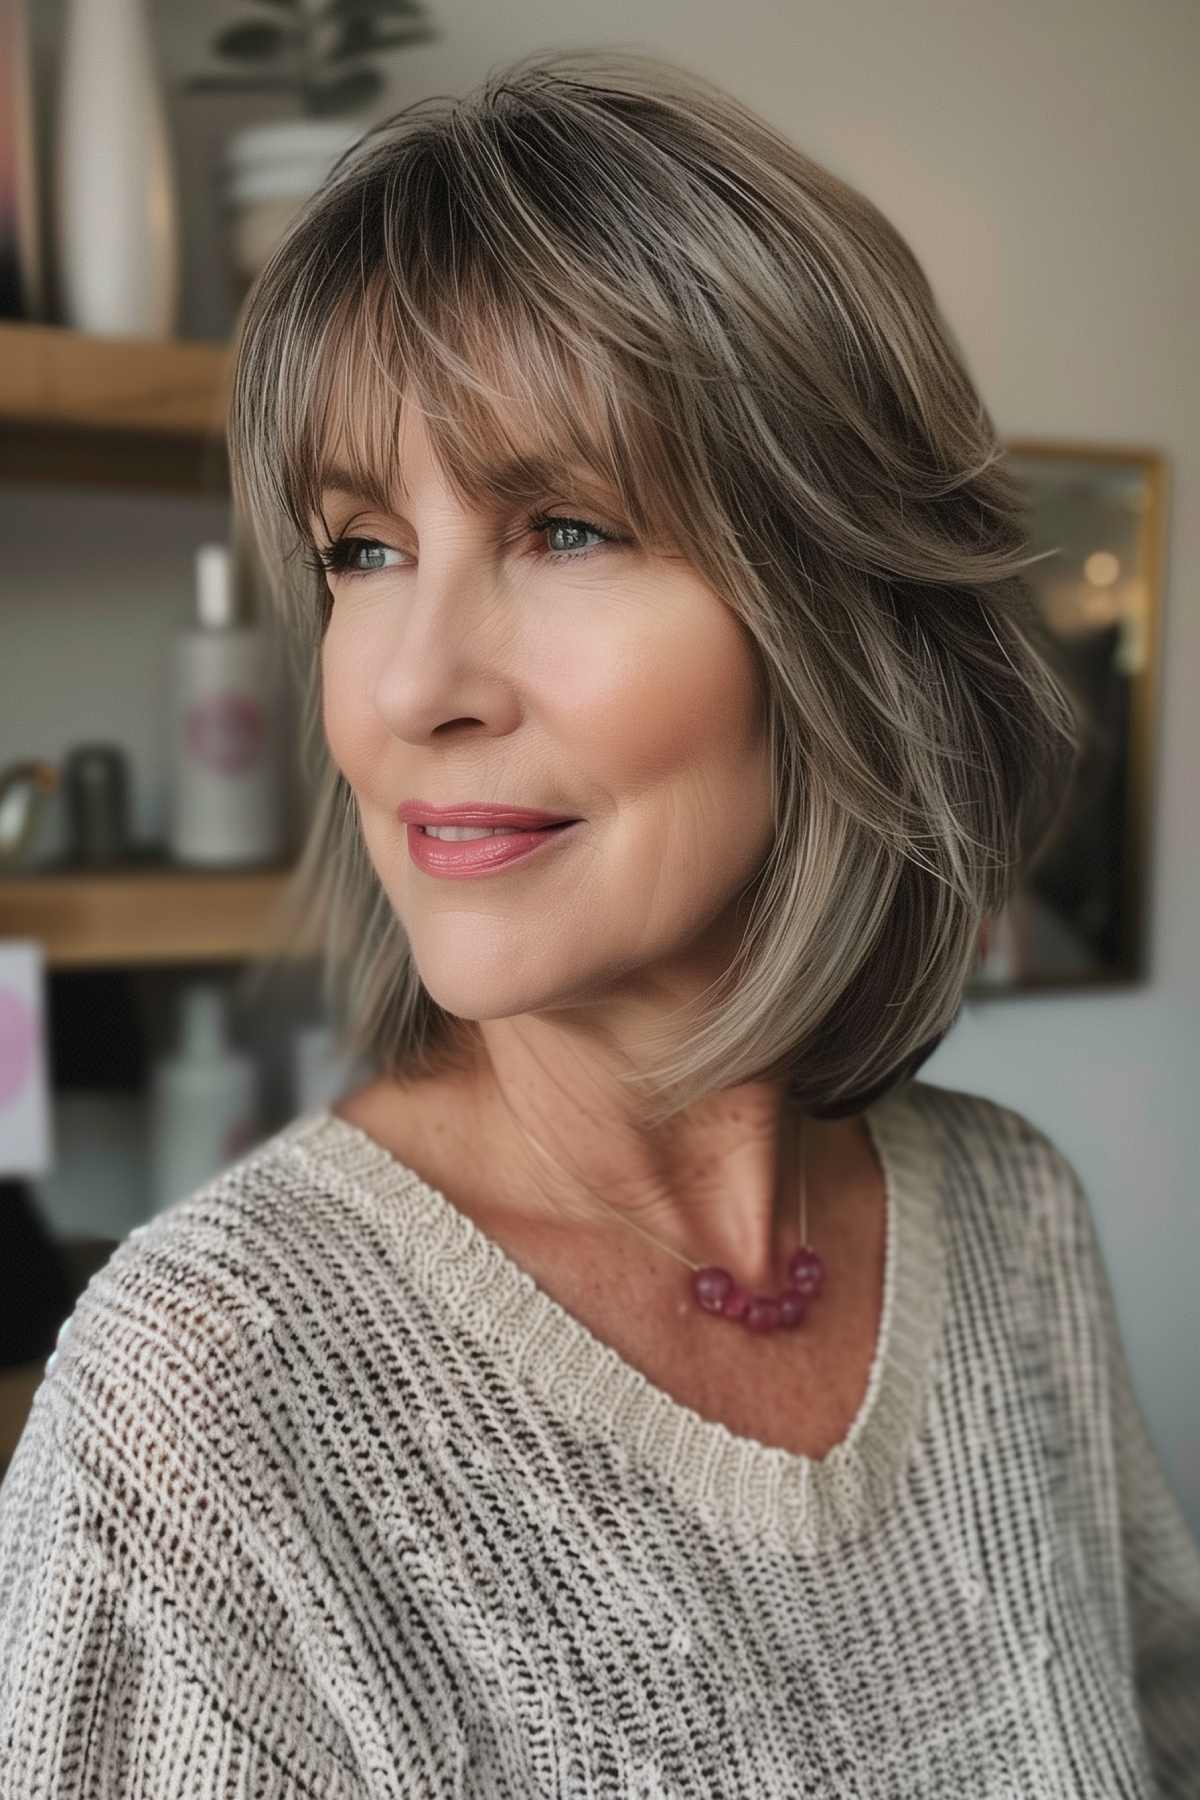 Layered shoulder-length haircut with blended bangs on a woman over 50, featuring a mix of gray tones to enhance natural beauty.